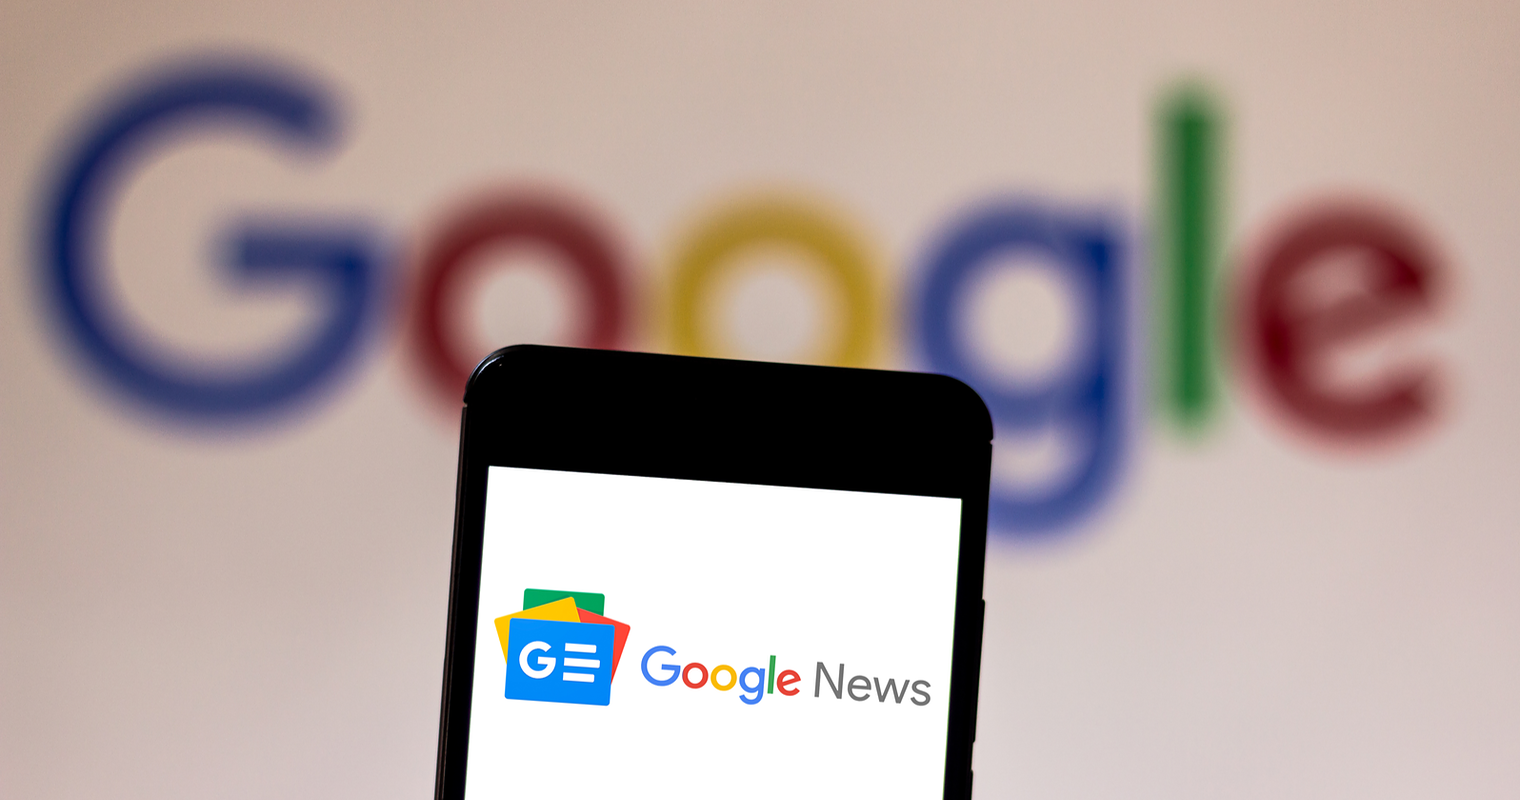 How to Get Your Website Listed in Google News